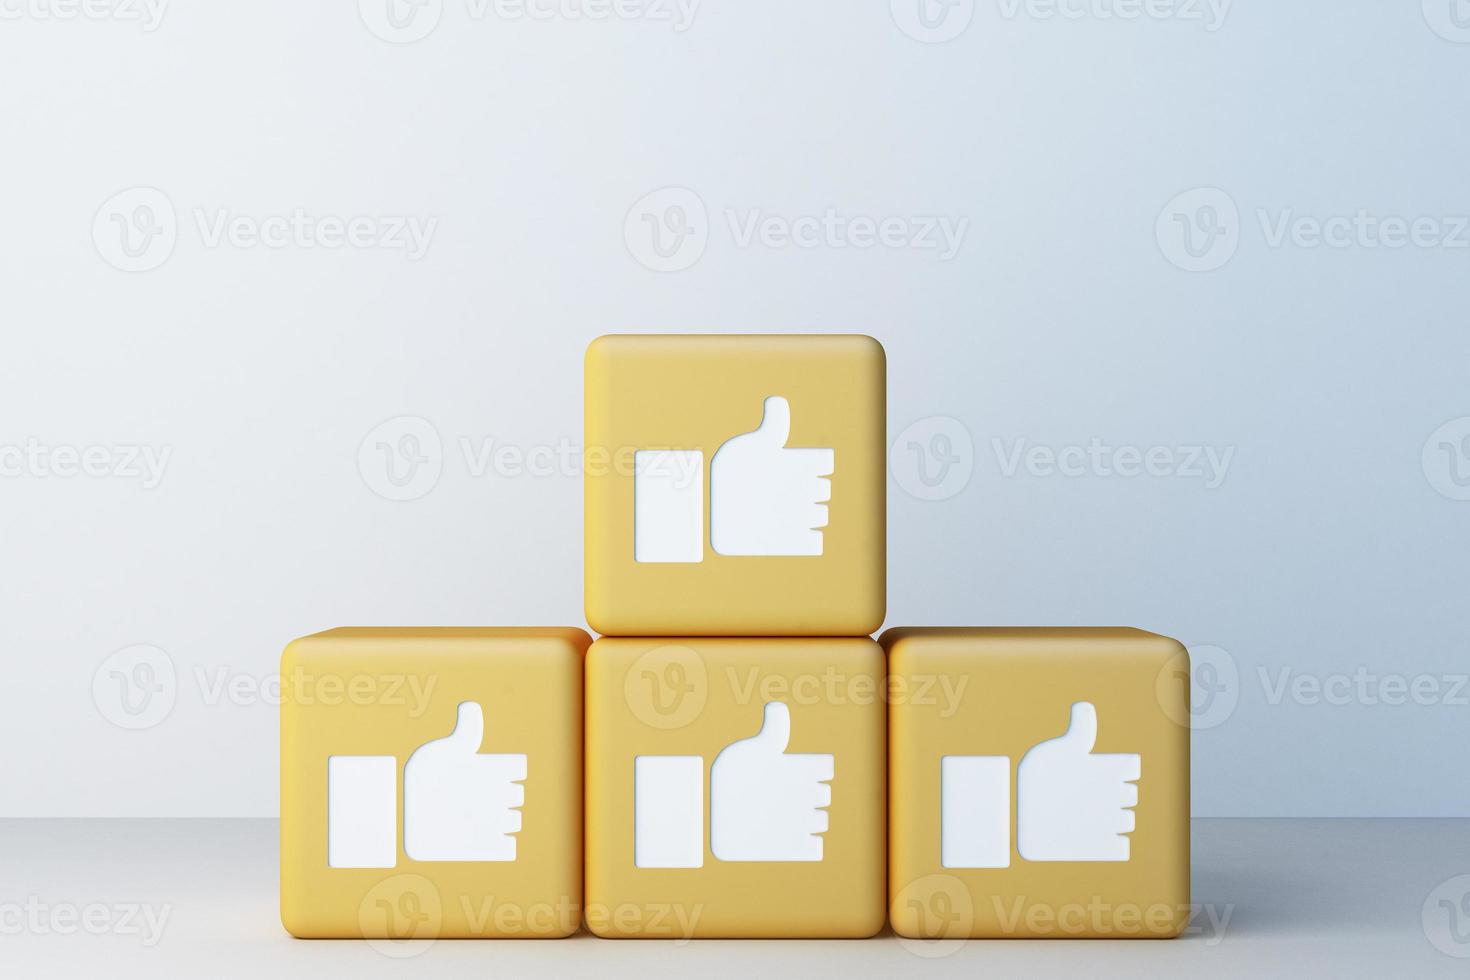 Like icon designed 3d box with white background. 3d rendering photo